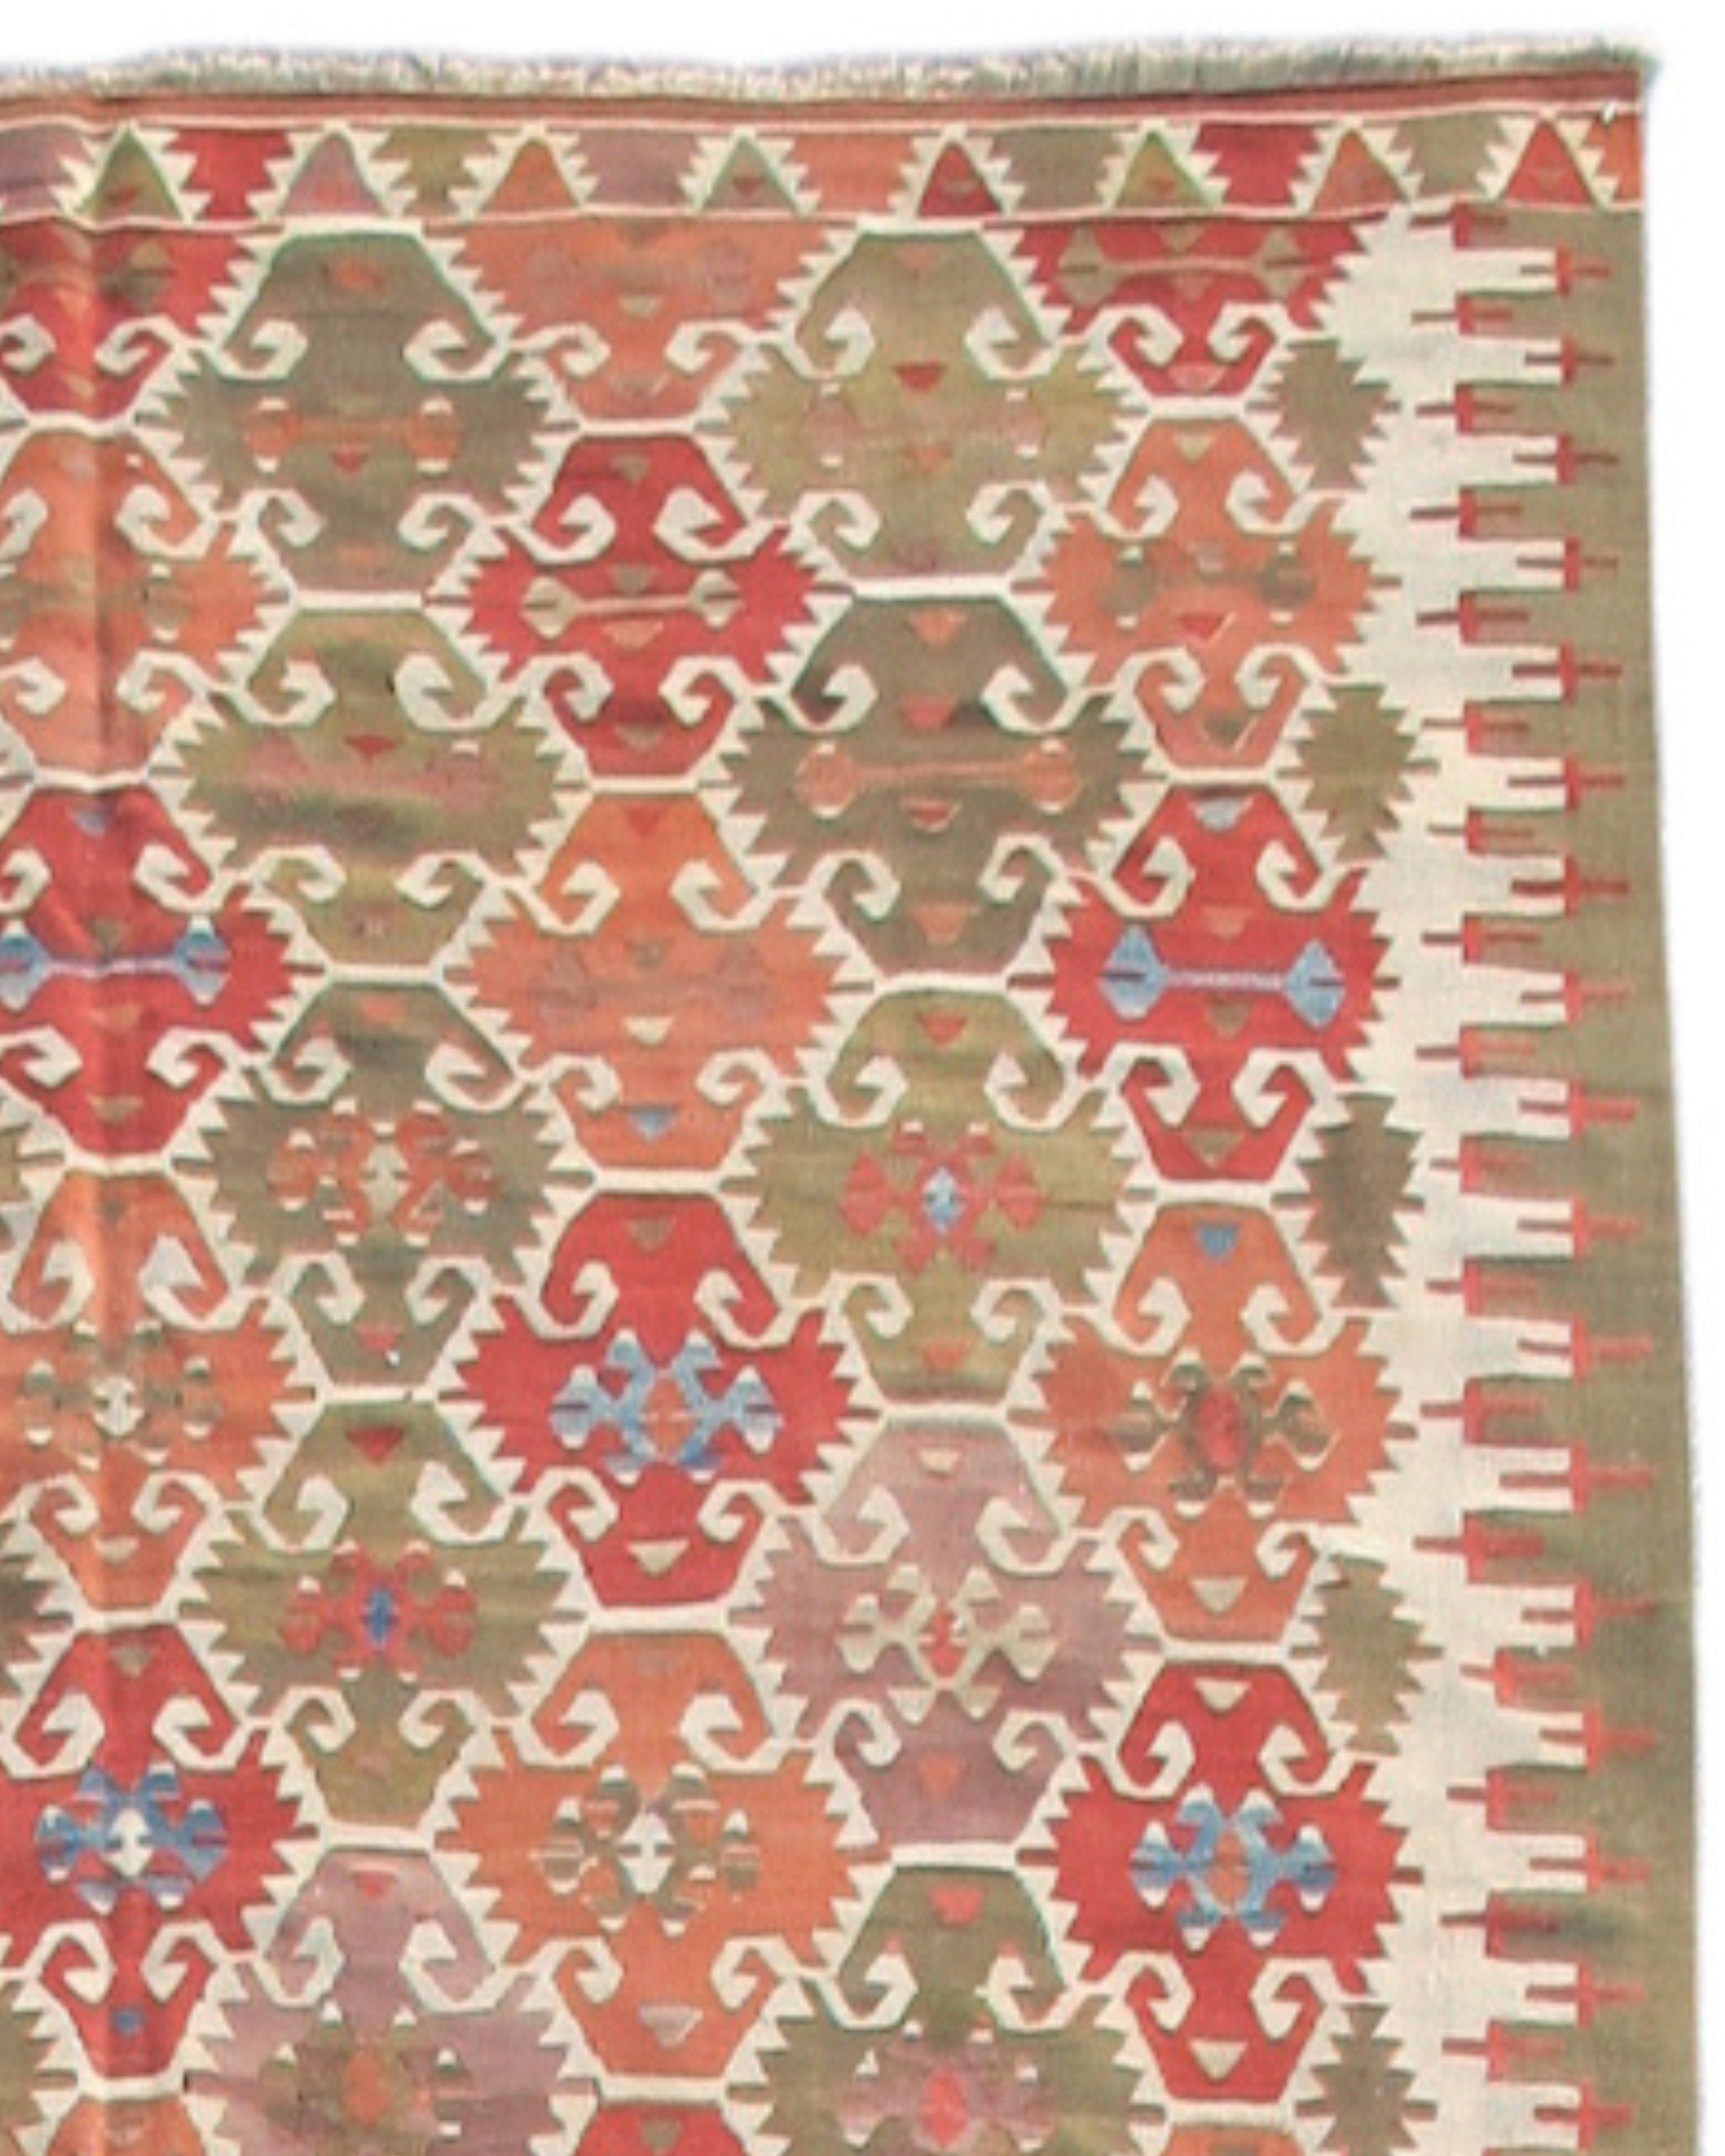 Antique Konya Kilim Rug, 19th Century In Good Condition For Sale In San Francisco, CA